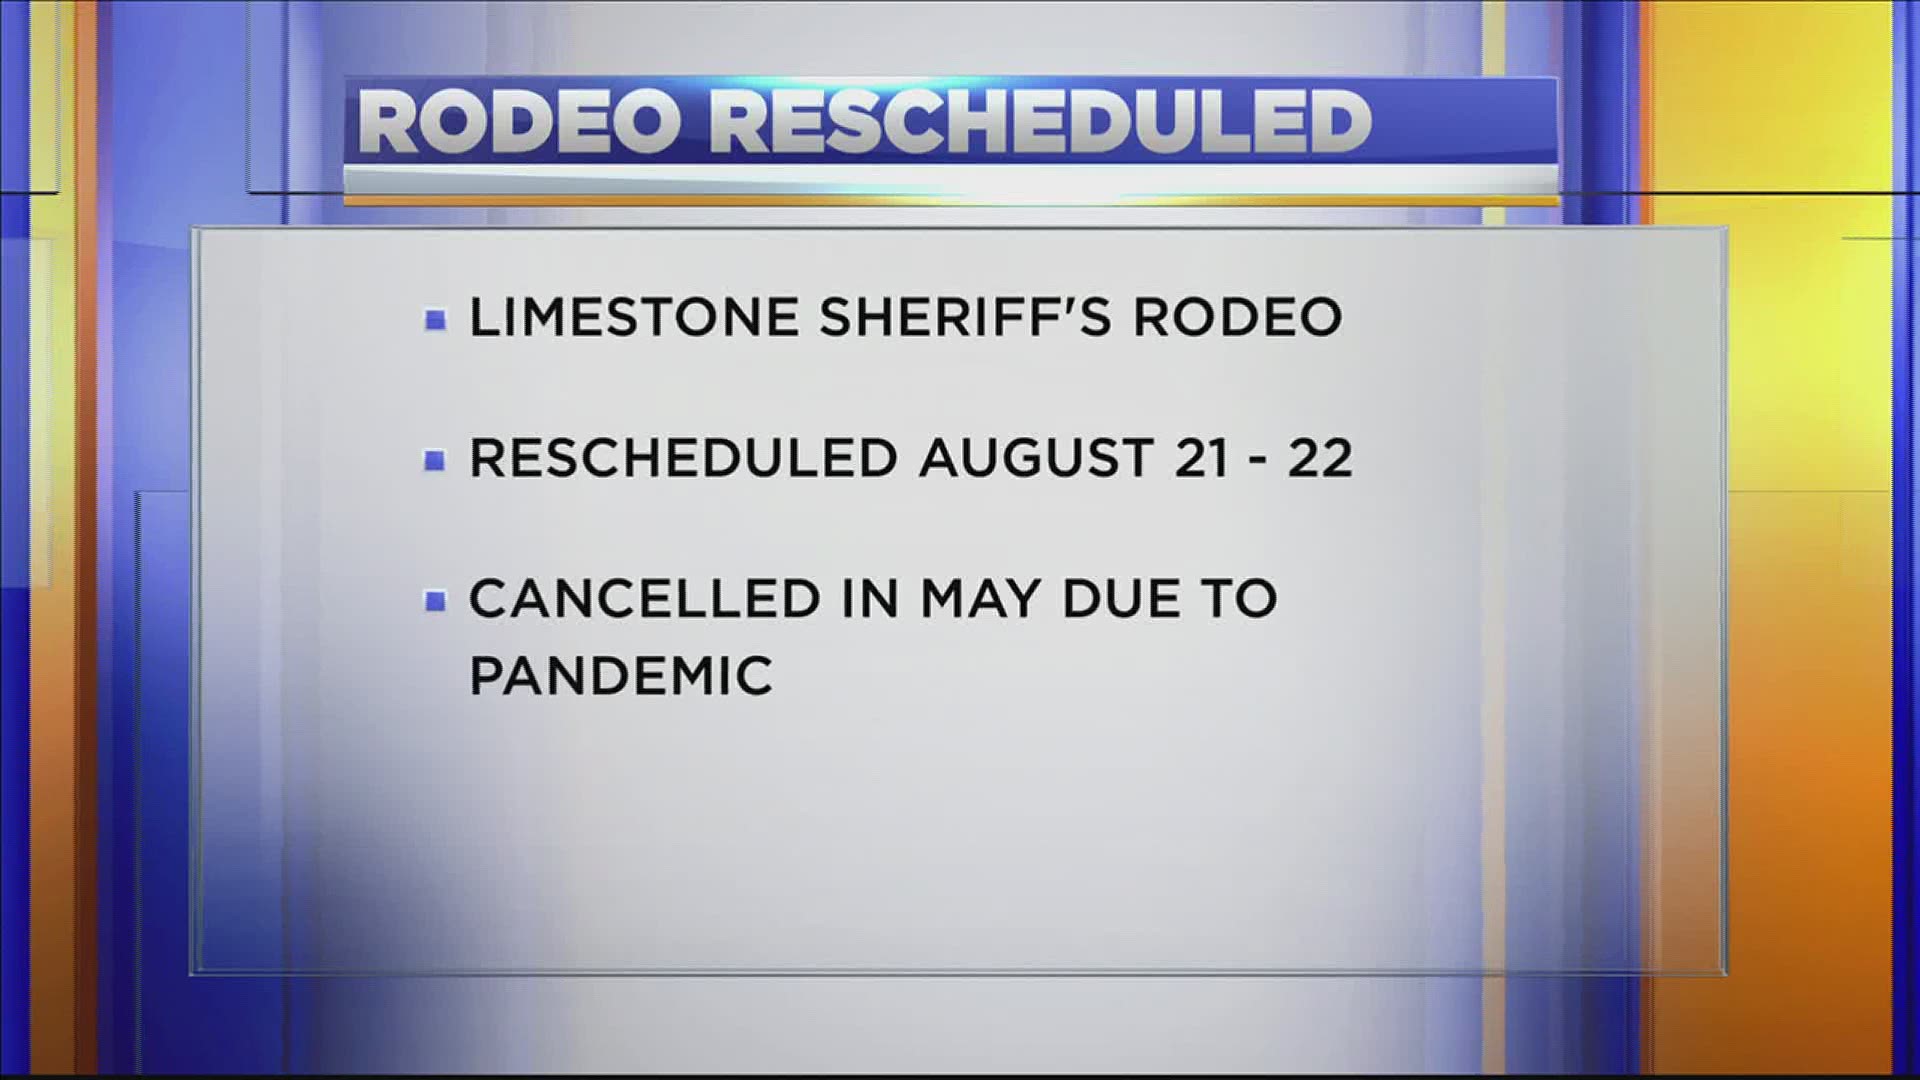 The rodeos will go on, with COVID-19 precautions.